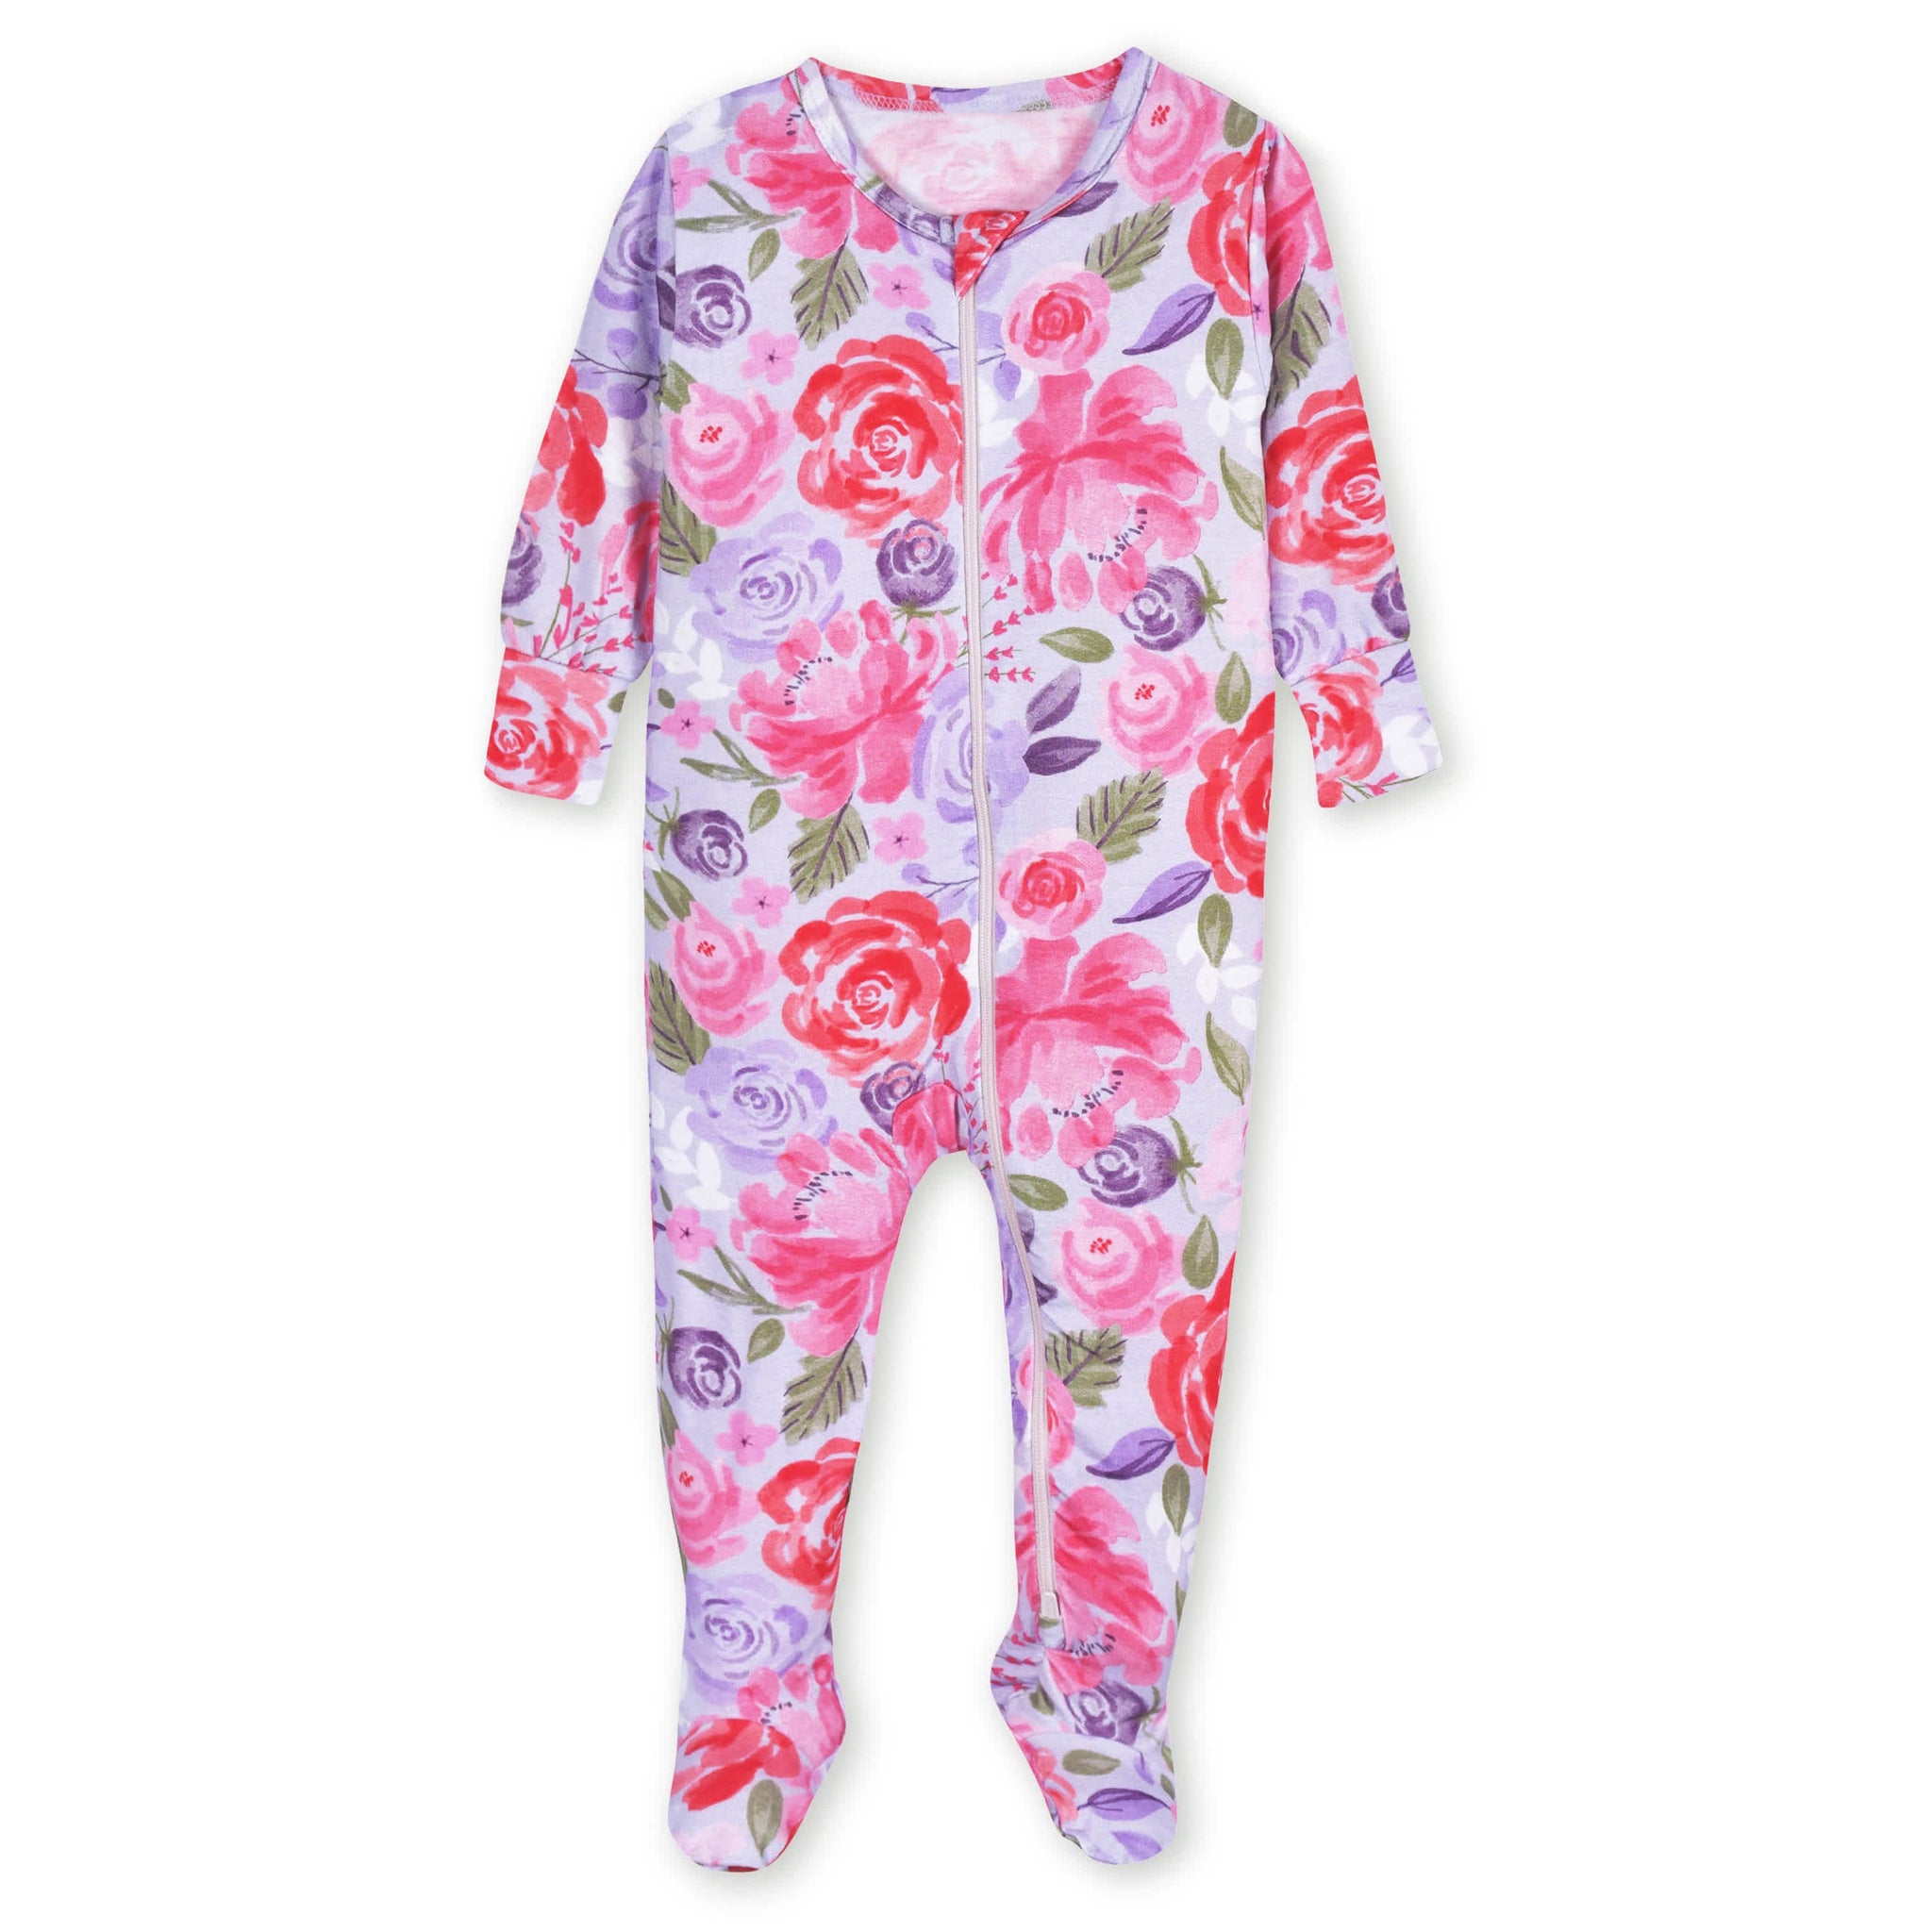 Baby & Toddler Girls Lilac Garden Buttery Soft Viscose Made from Eucalyptus Snug Fit Footed Pajamas-Gerber Childrenswear Wholesale